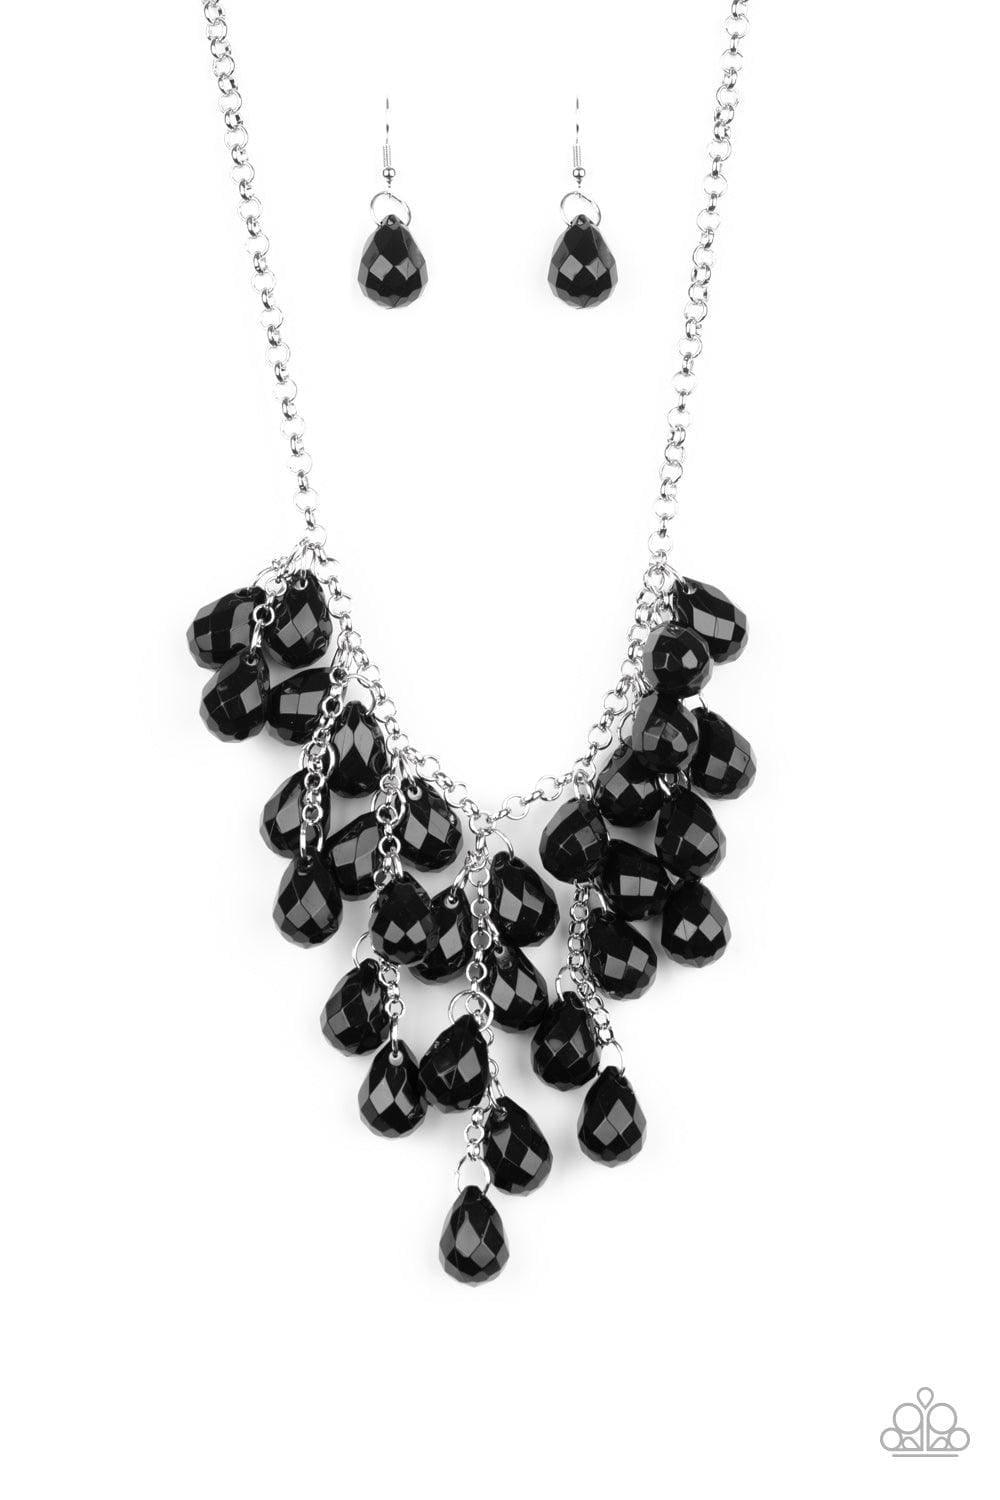 Paparazzi Accessories - Serenely Scattered - Black Necklace - Bling by JessieK